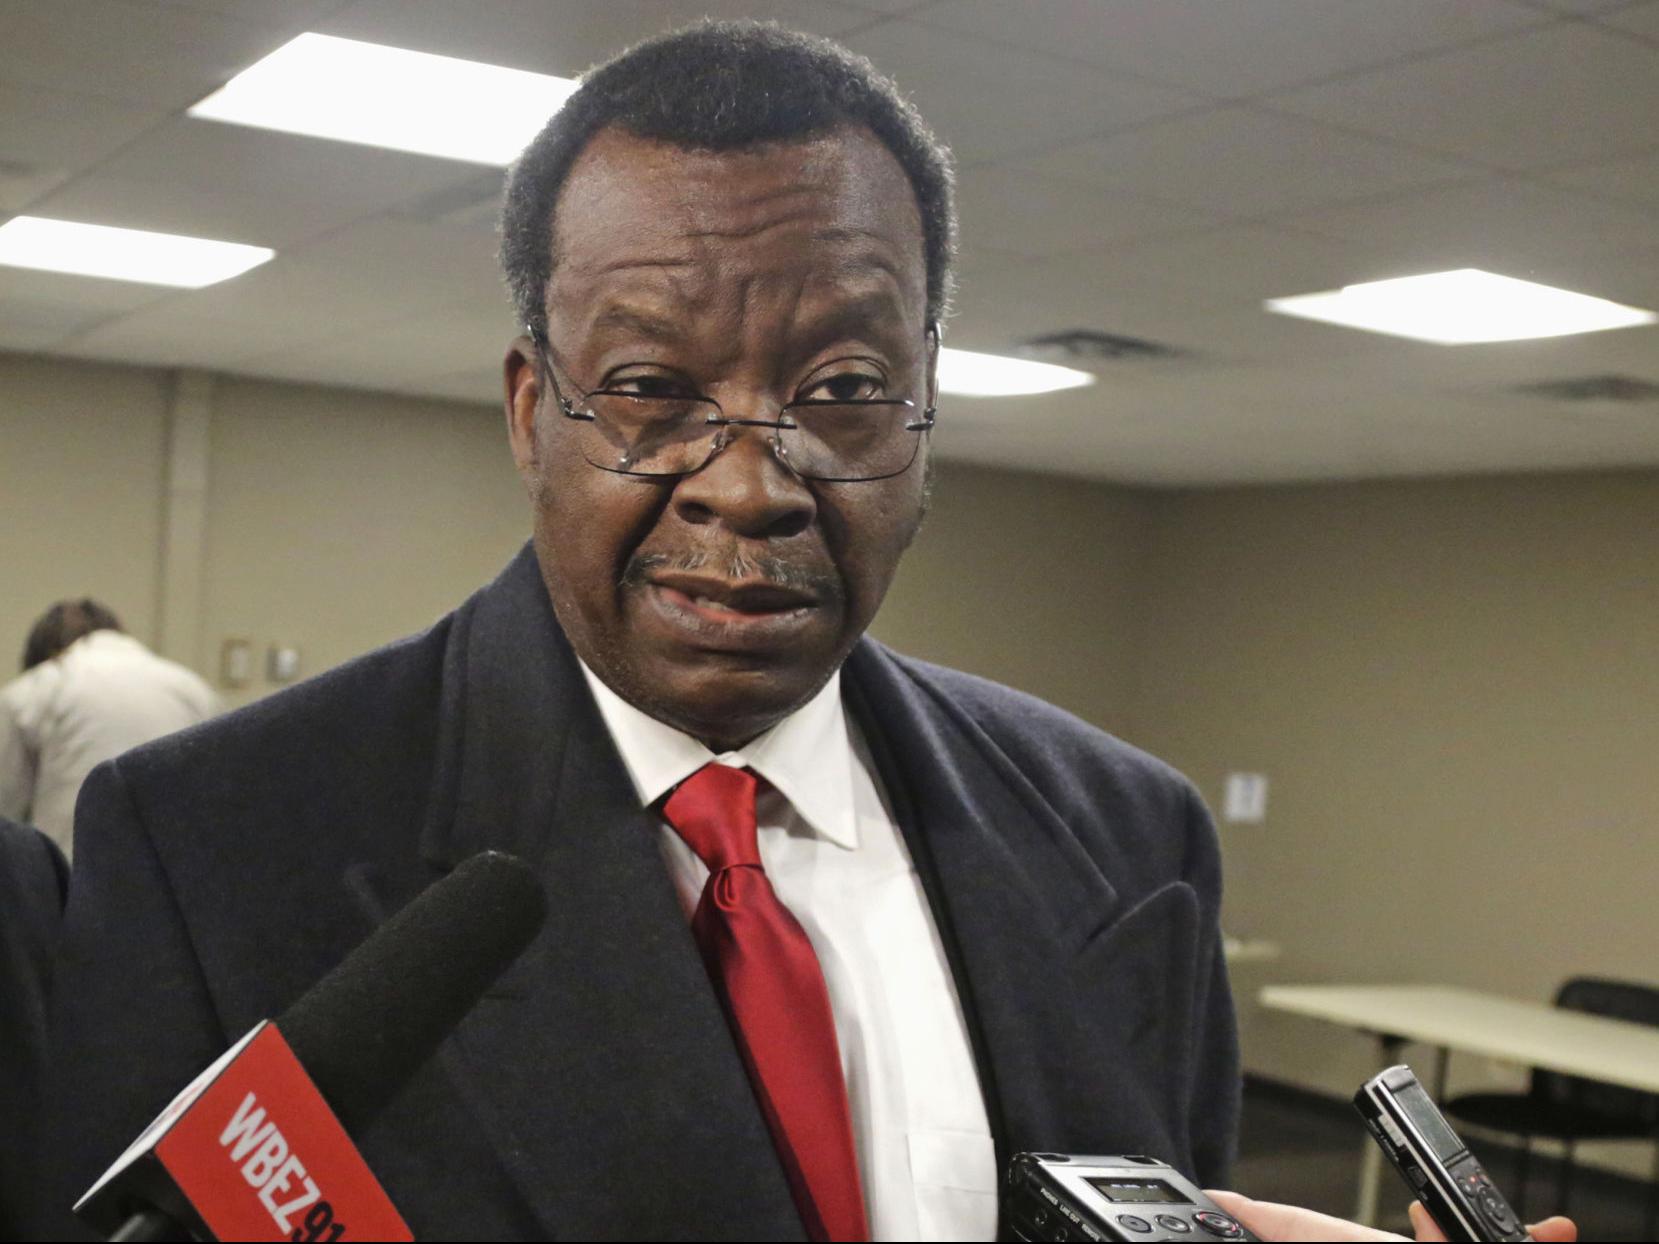 Mayoral hopeful Willie Wilson wants to cut taxes, lure new